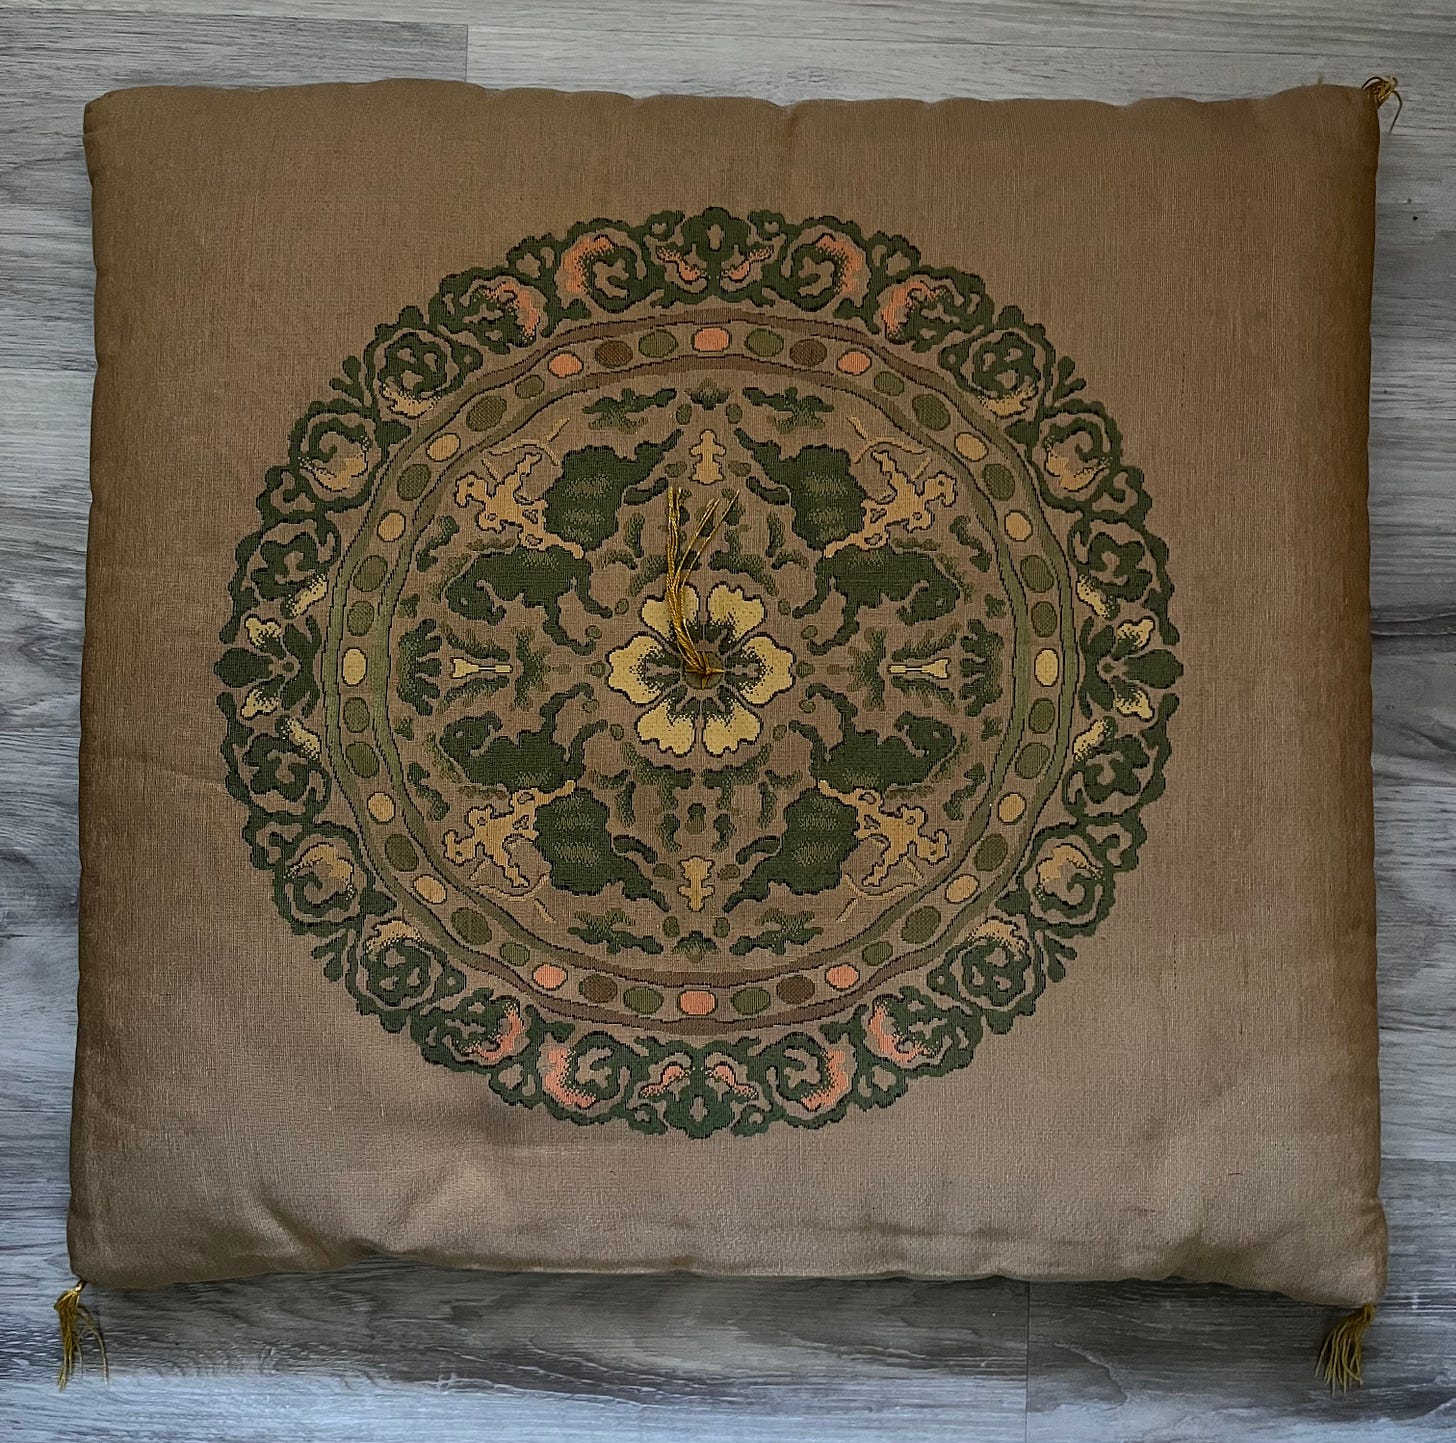 A golden ochre flat square pillow with flowers, horses, and archers on it in greens, golds, and pinks.